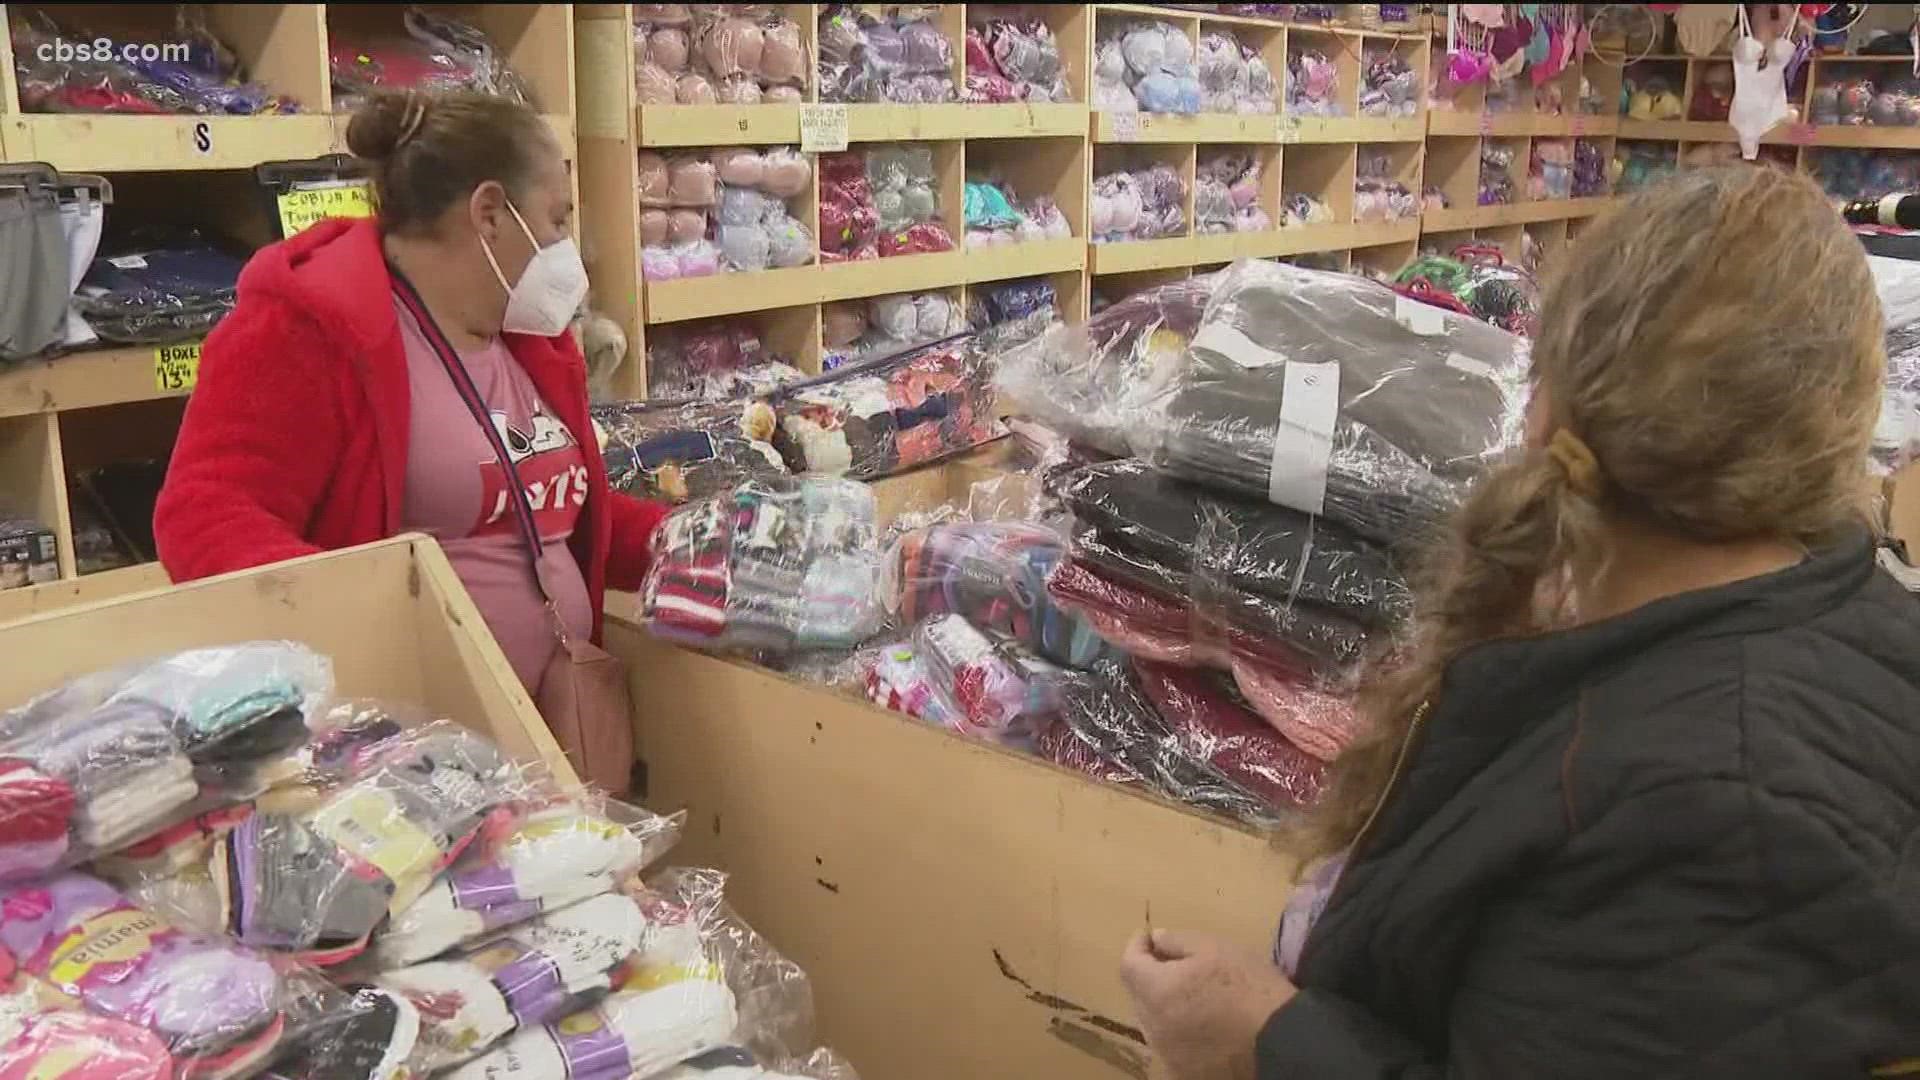 The San Ysidro Chamber of Commerce says the holiday shopping rush has brought sales back to 75-80% of pre-pandemic levels.